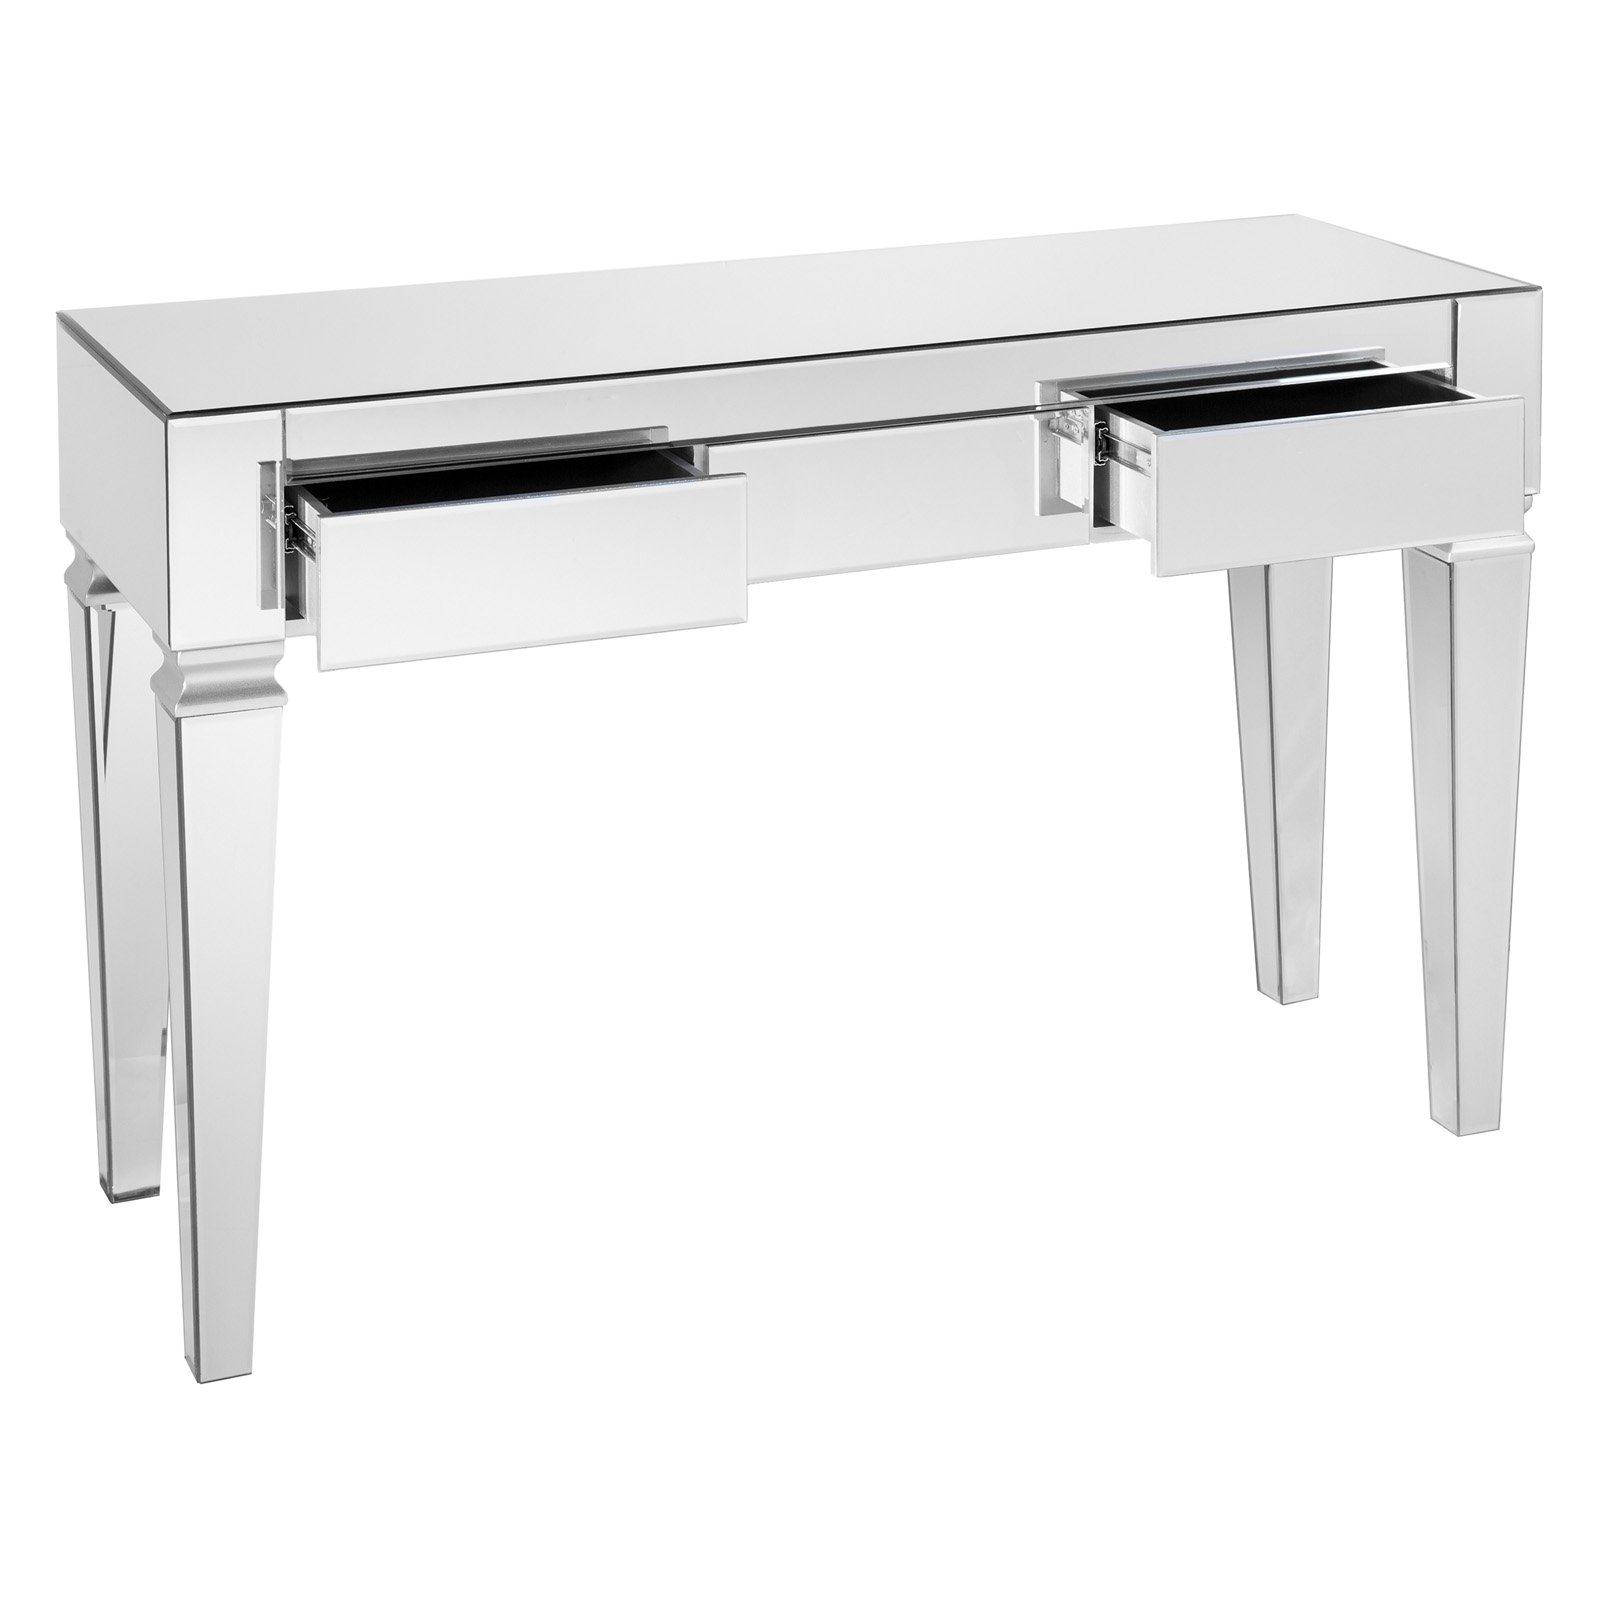 46" Clear and Silver Contemporary Beveled Mirror Rectangular Top Console Table - image 4 of 10